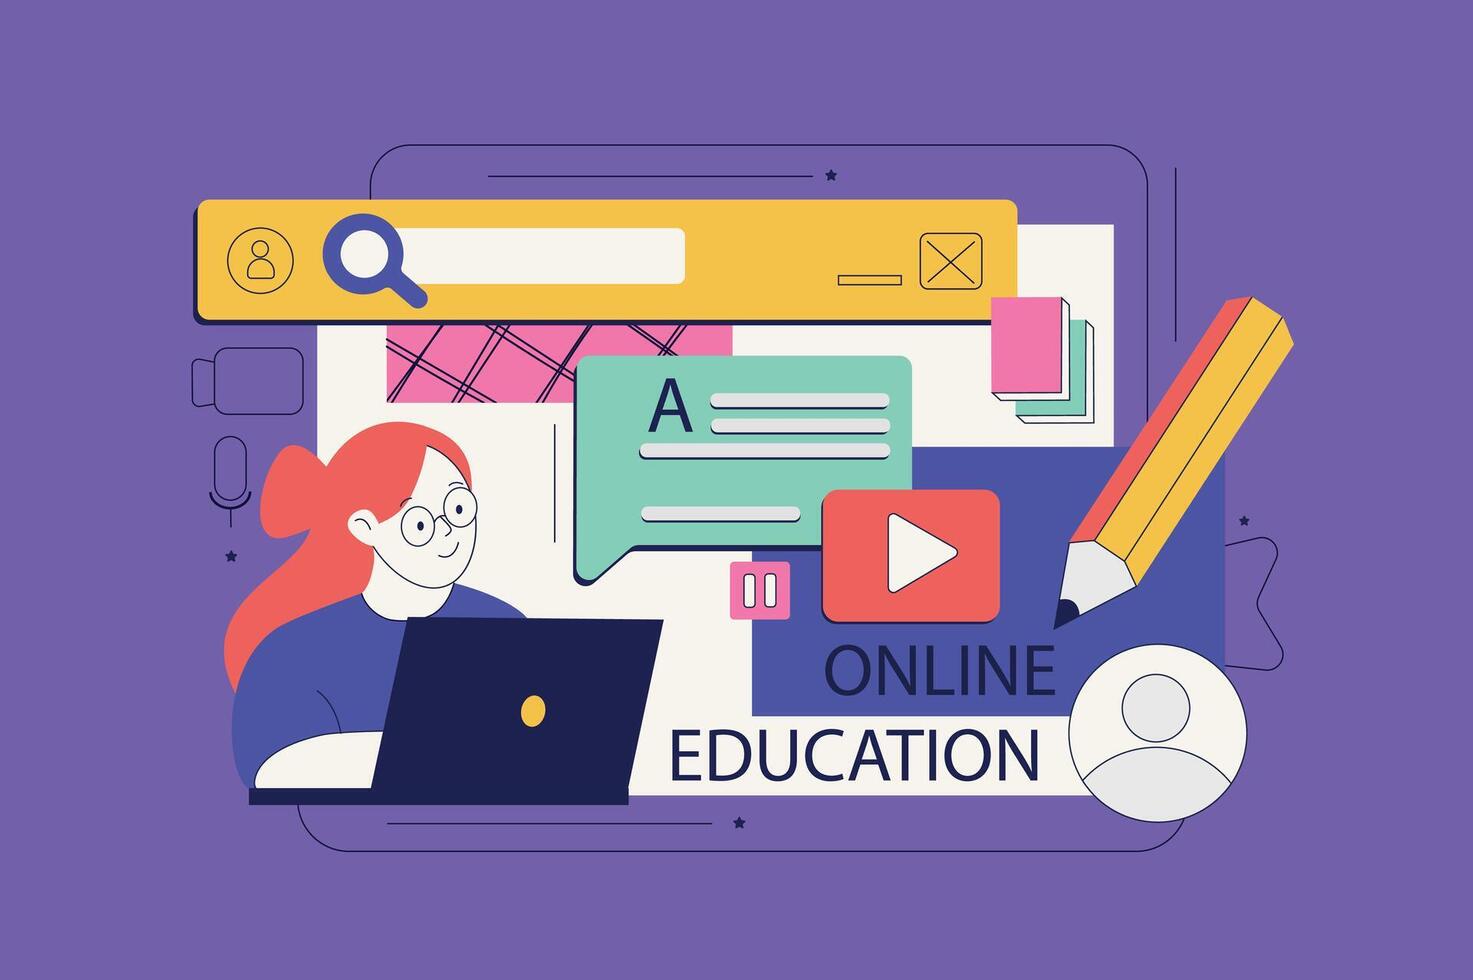 Online education concept in flat neo brutalism design for web. Student learning at video lessons, doing homework, searches information. Vector illustration for social media banner, marketing material.